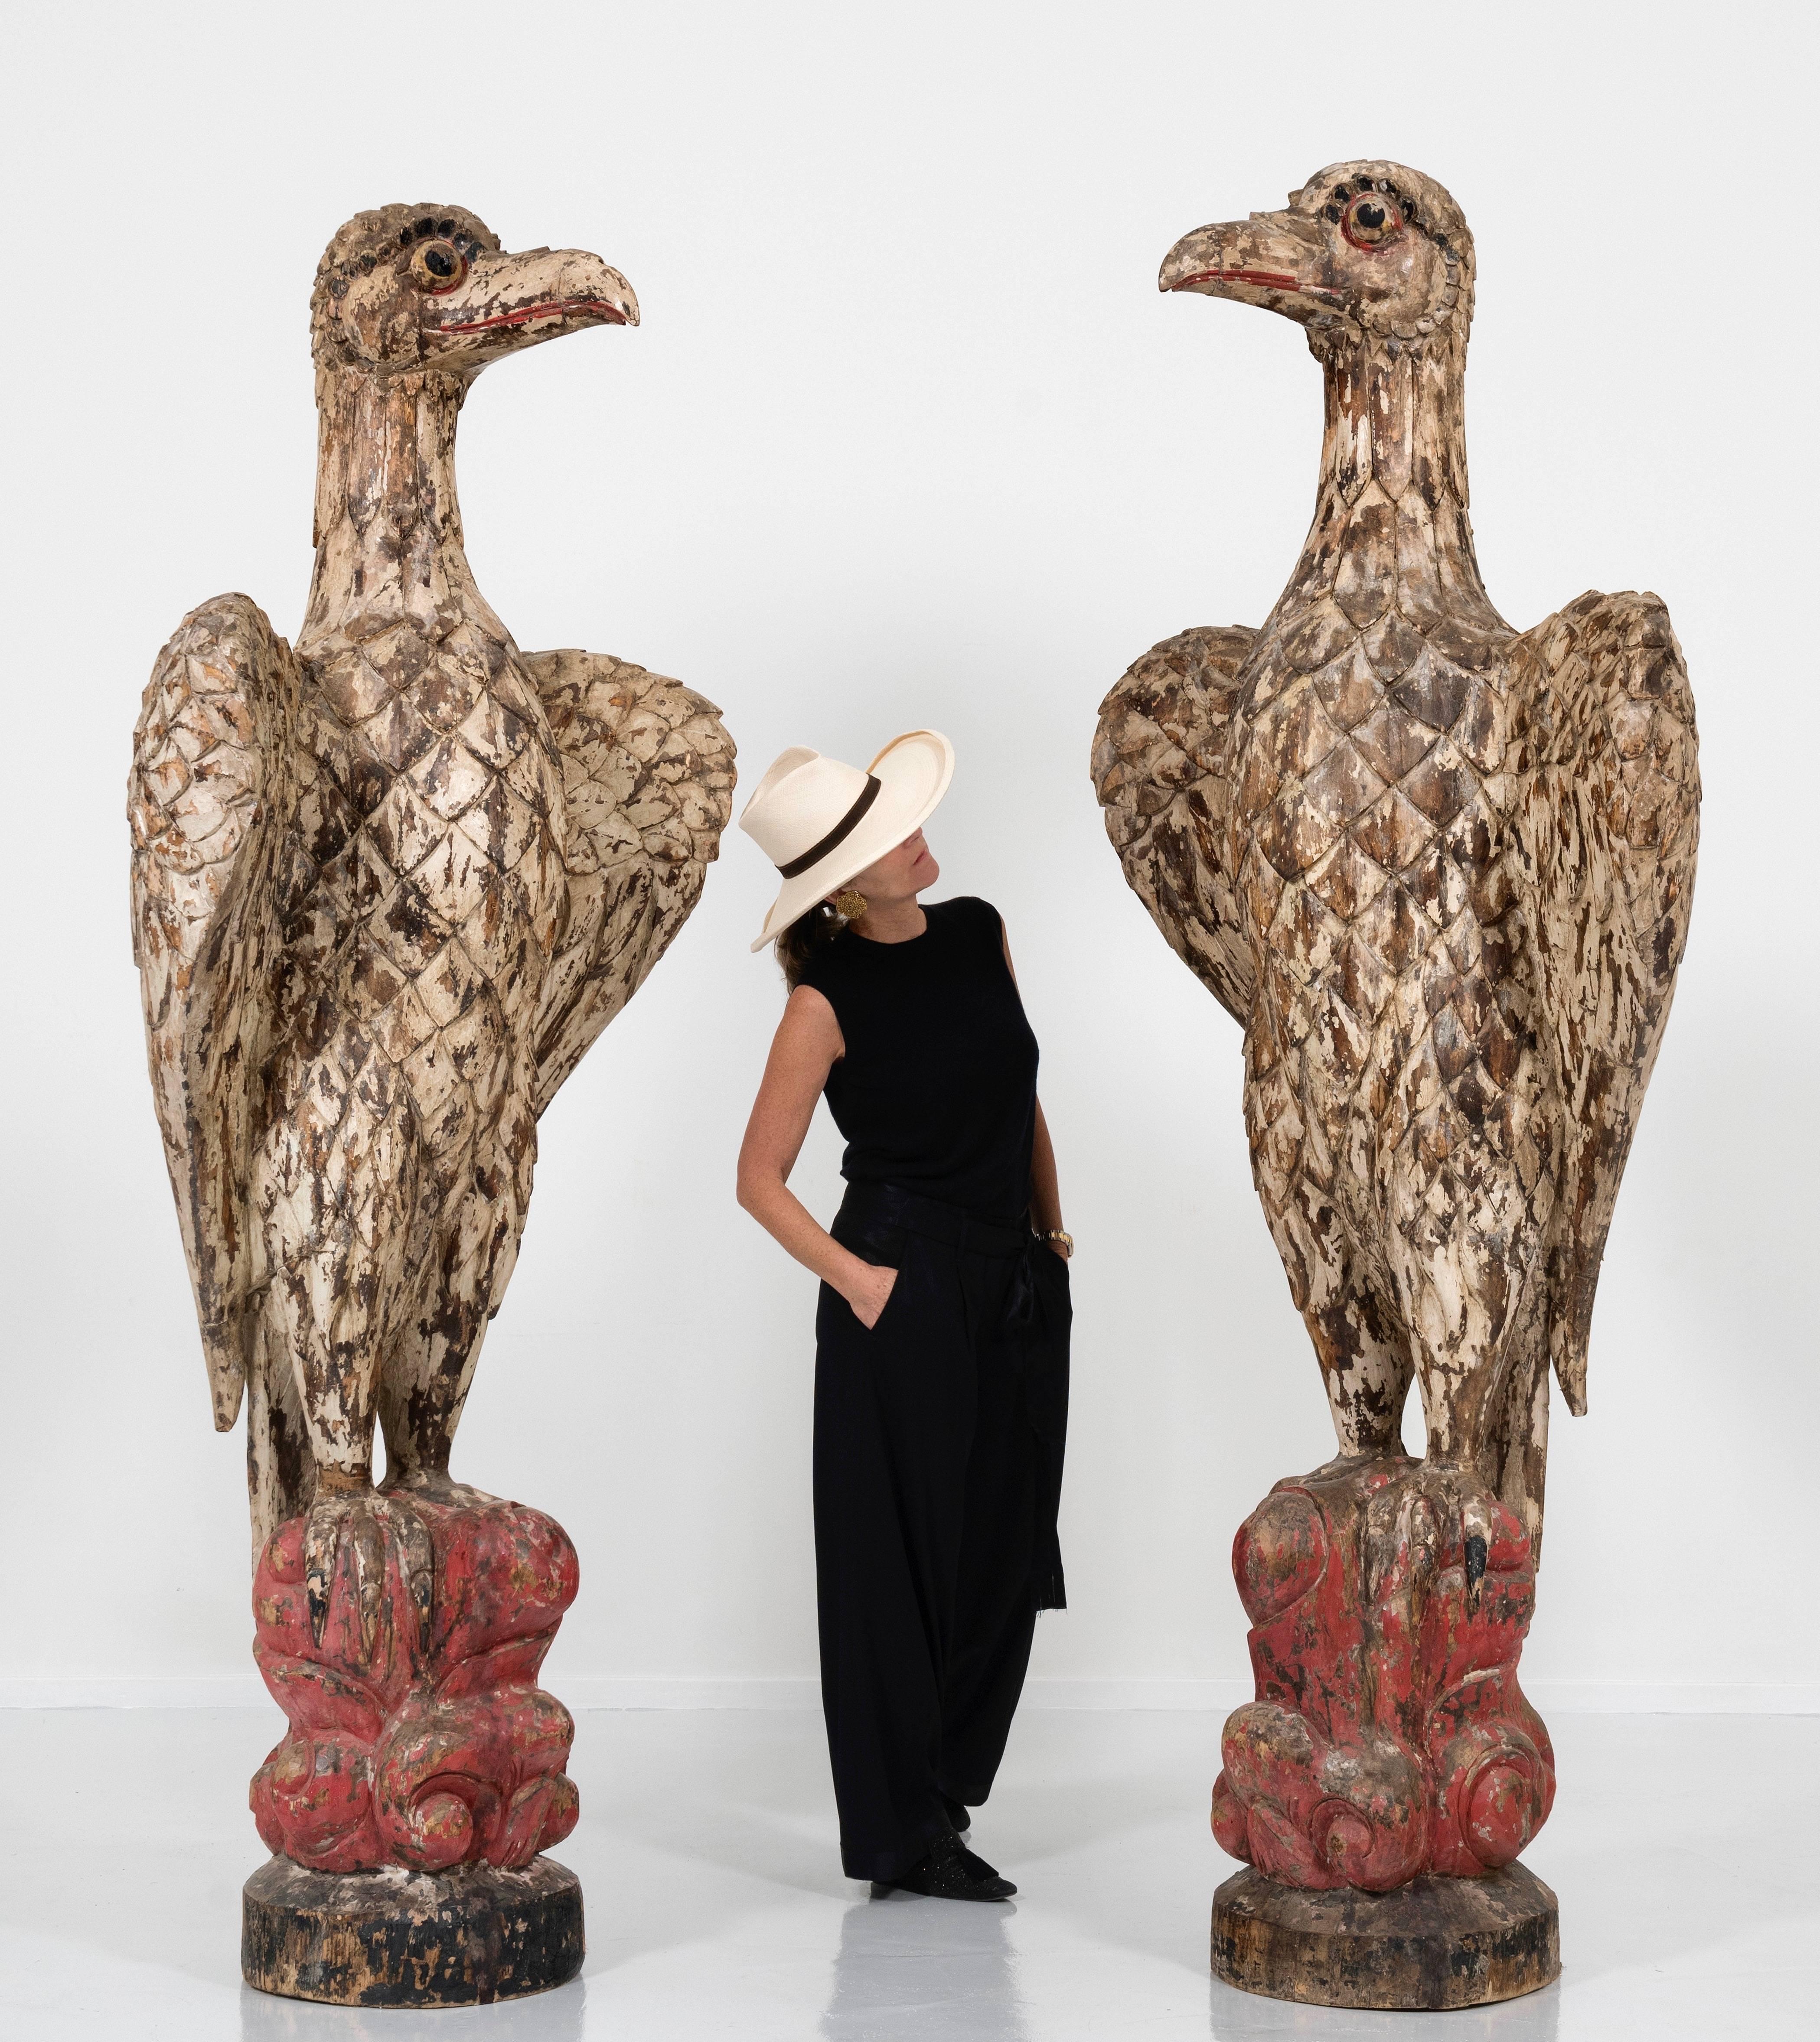 Monumental rare pair of eagles of 100 inches Height.
Carved wood, formerly polychromed, base in stylized motives. 
Beautiful age patine. 
Spectacular.
Creates a spectacular decor.
